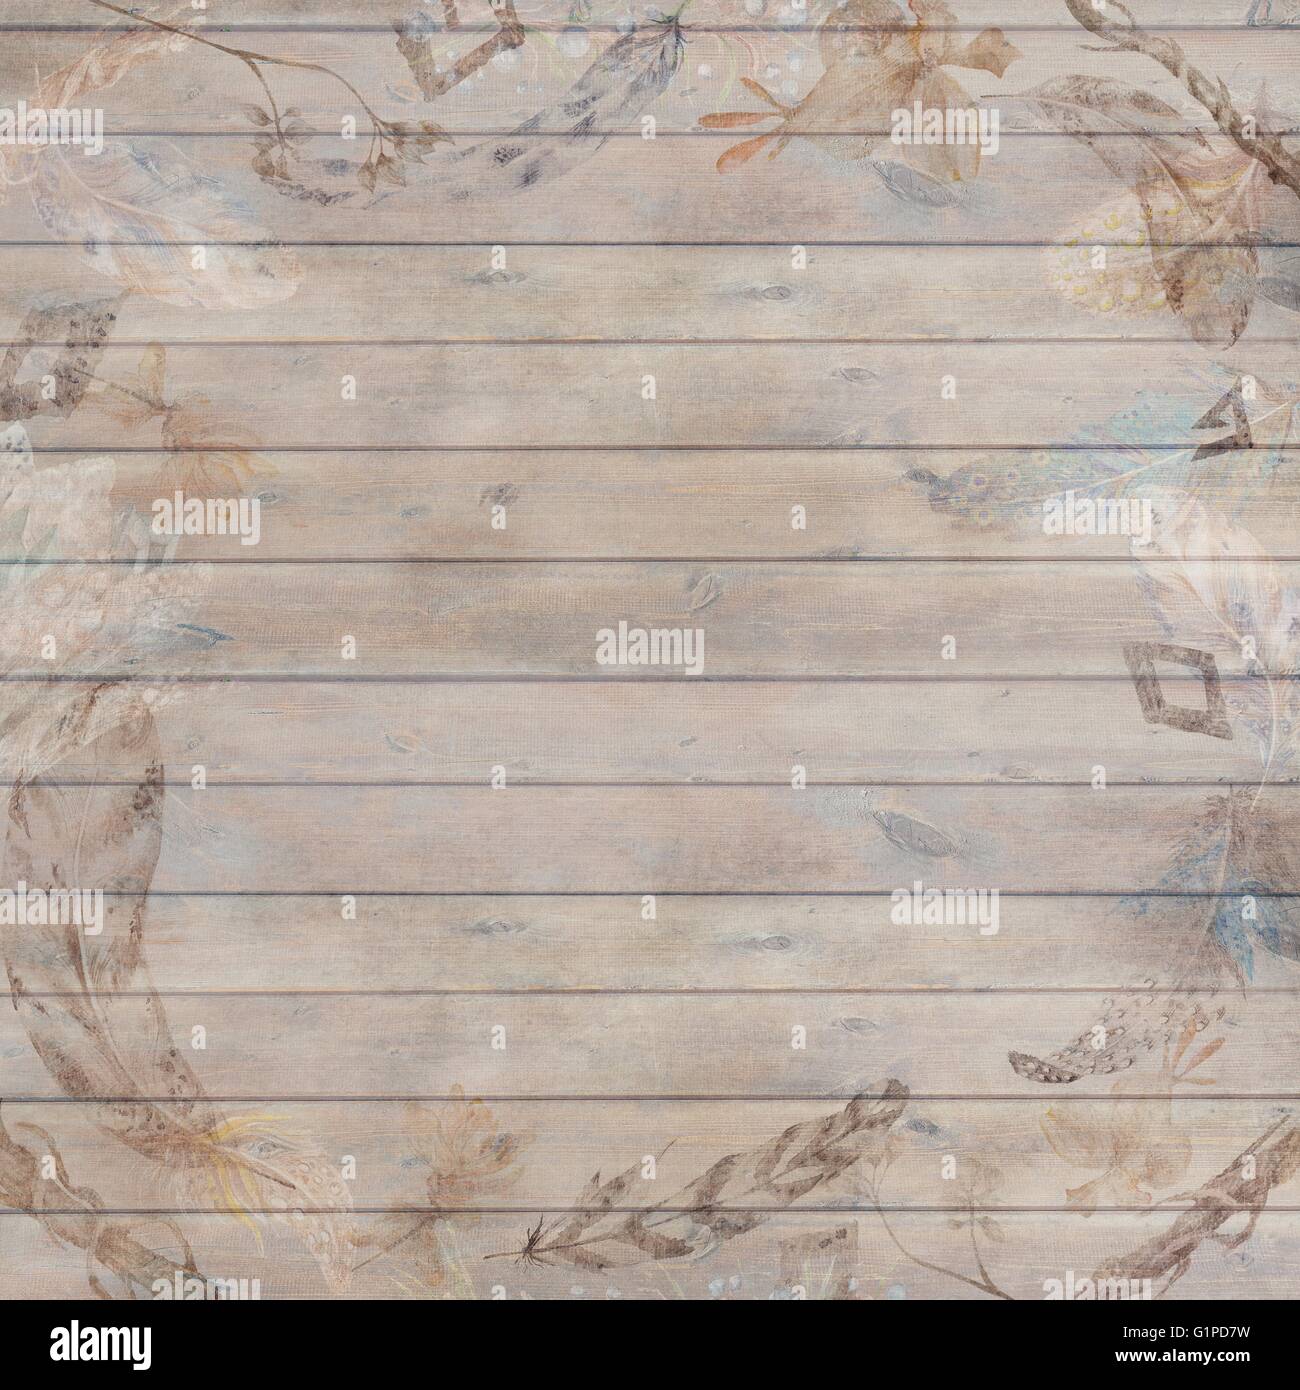 Vintage plank texture with scratched watercolor tribal illustrations of feathers for thanksgiving scrapbooking and design Stock Photo